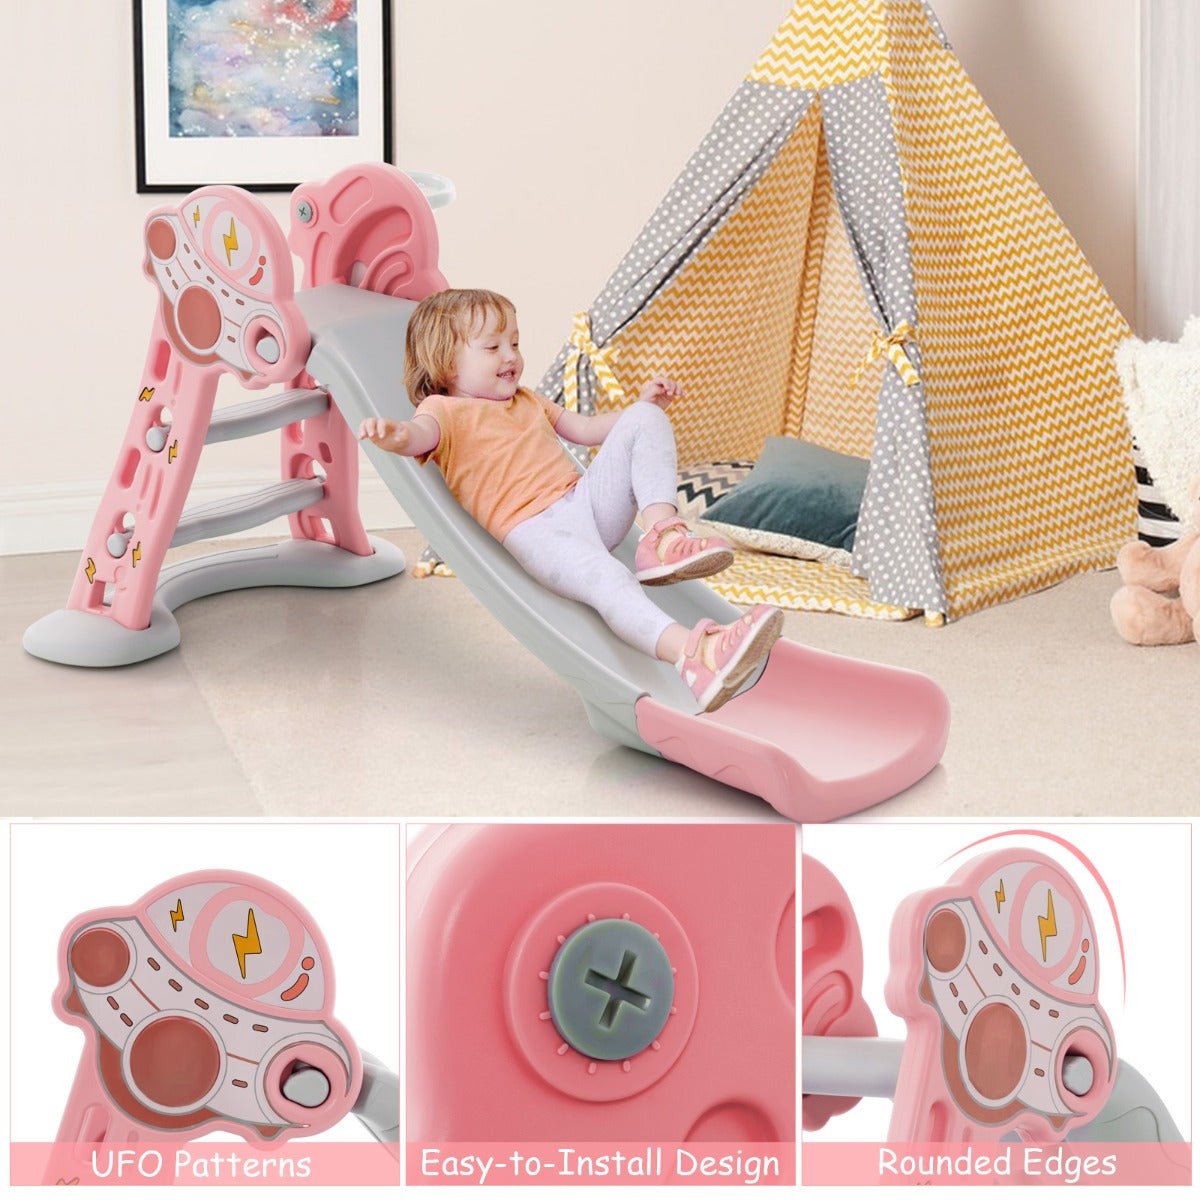 All-in-One Pink Toddler Sport Playset